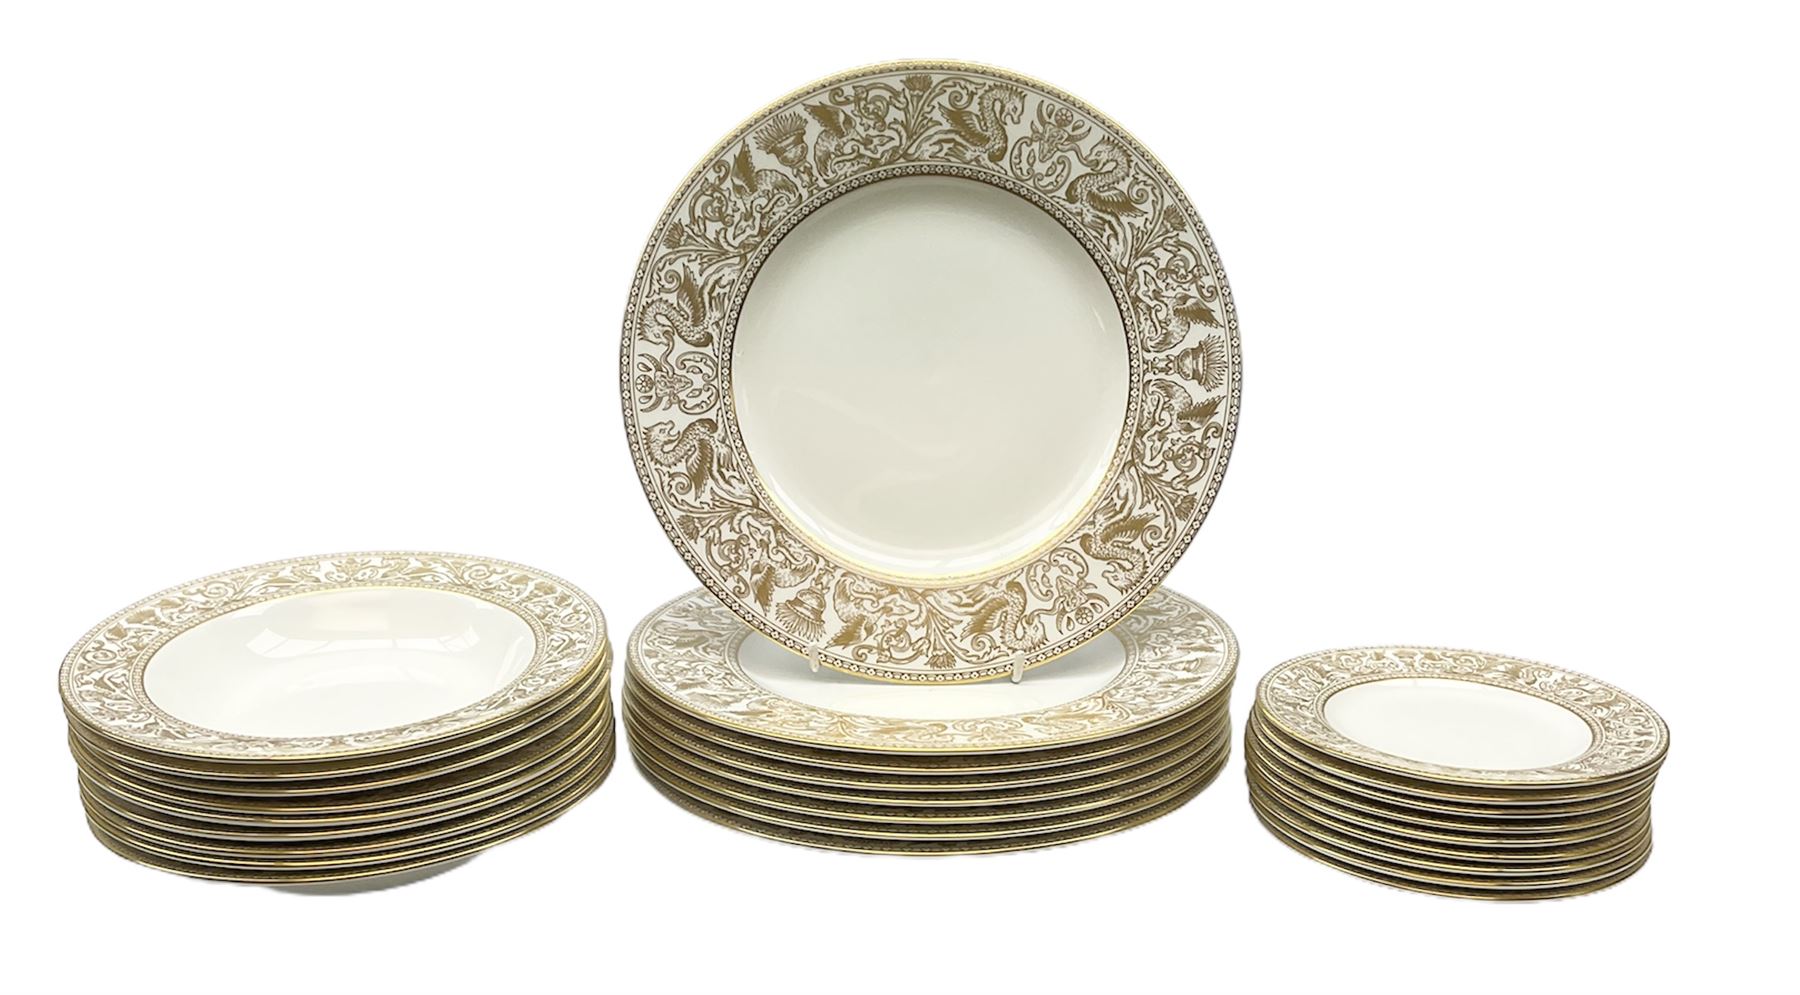 Wedgwood dinner wares decorated in the 'Gold Florentine' pattern